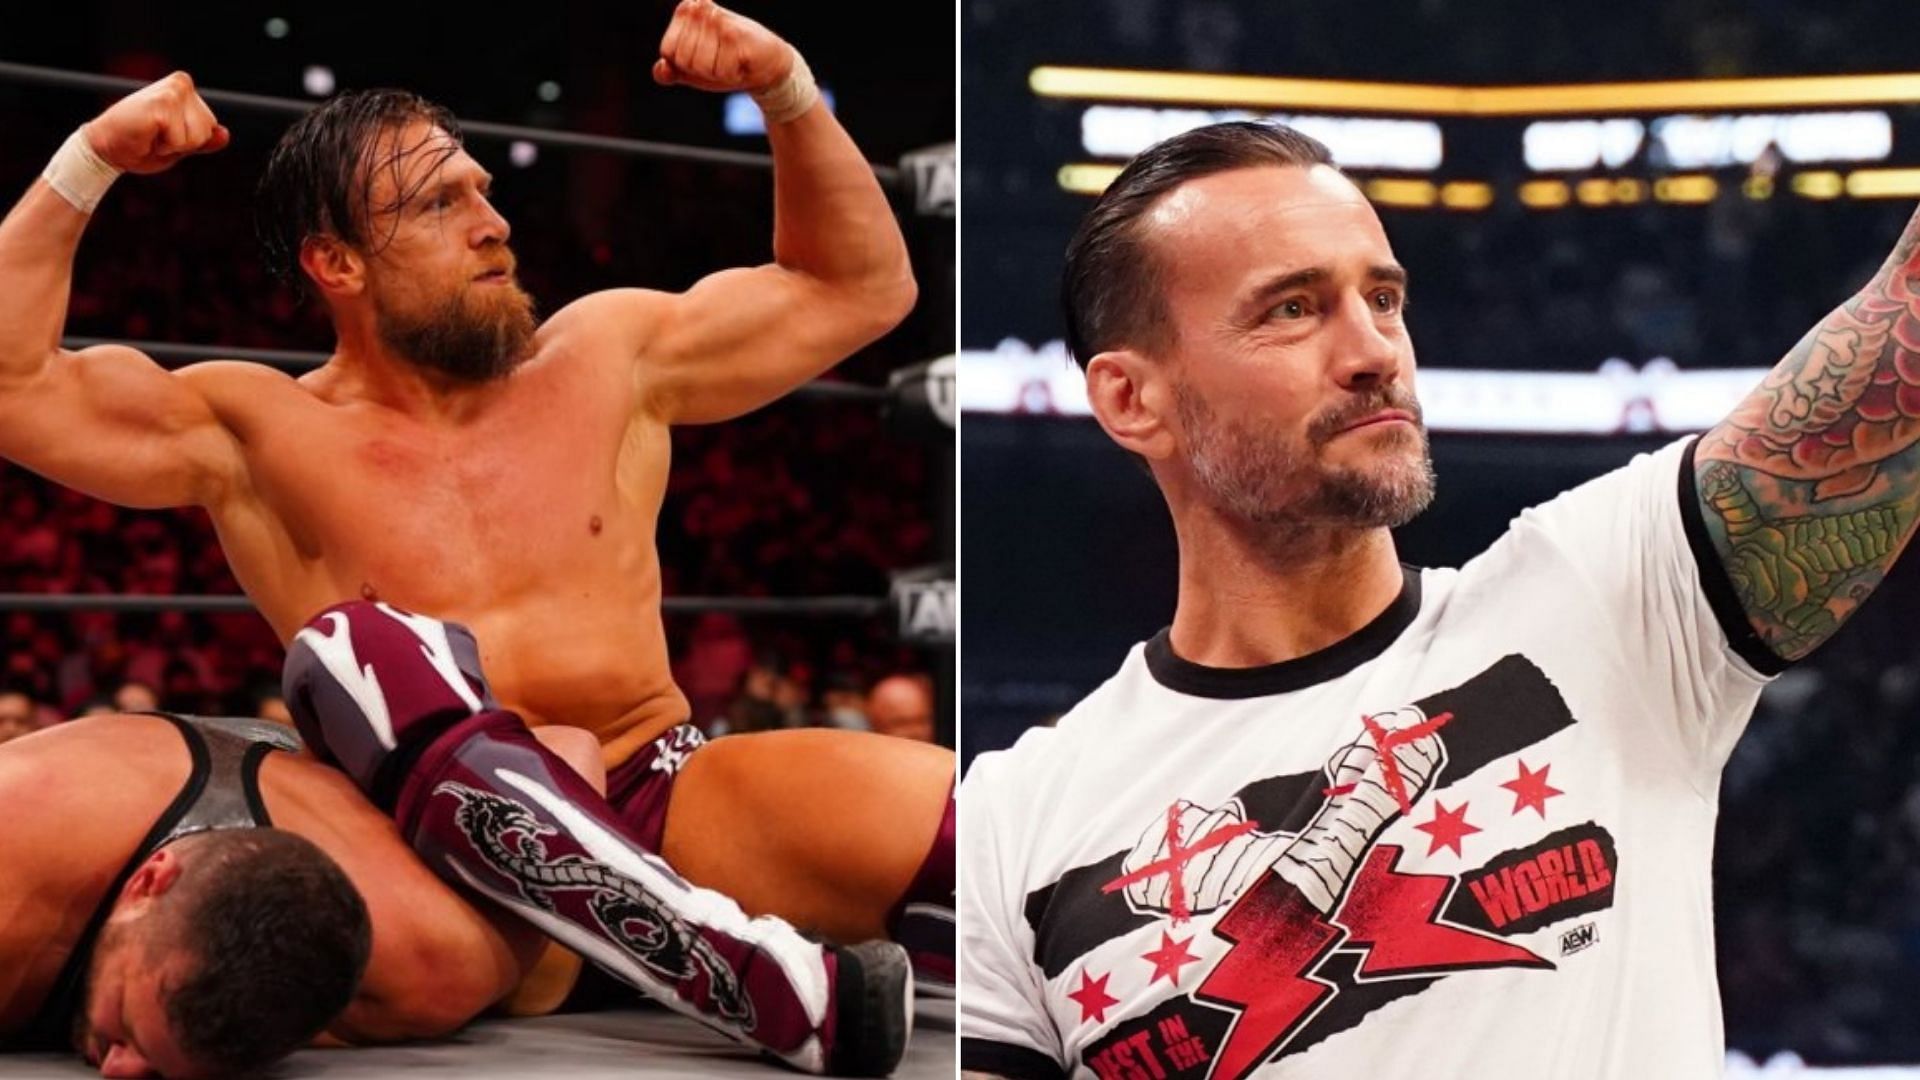 CM Punk and Bryan Danielson became All-Elite in 2021